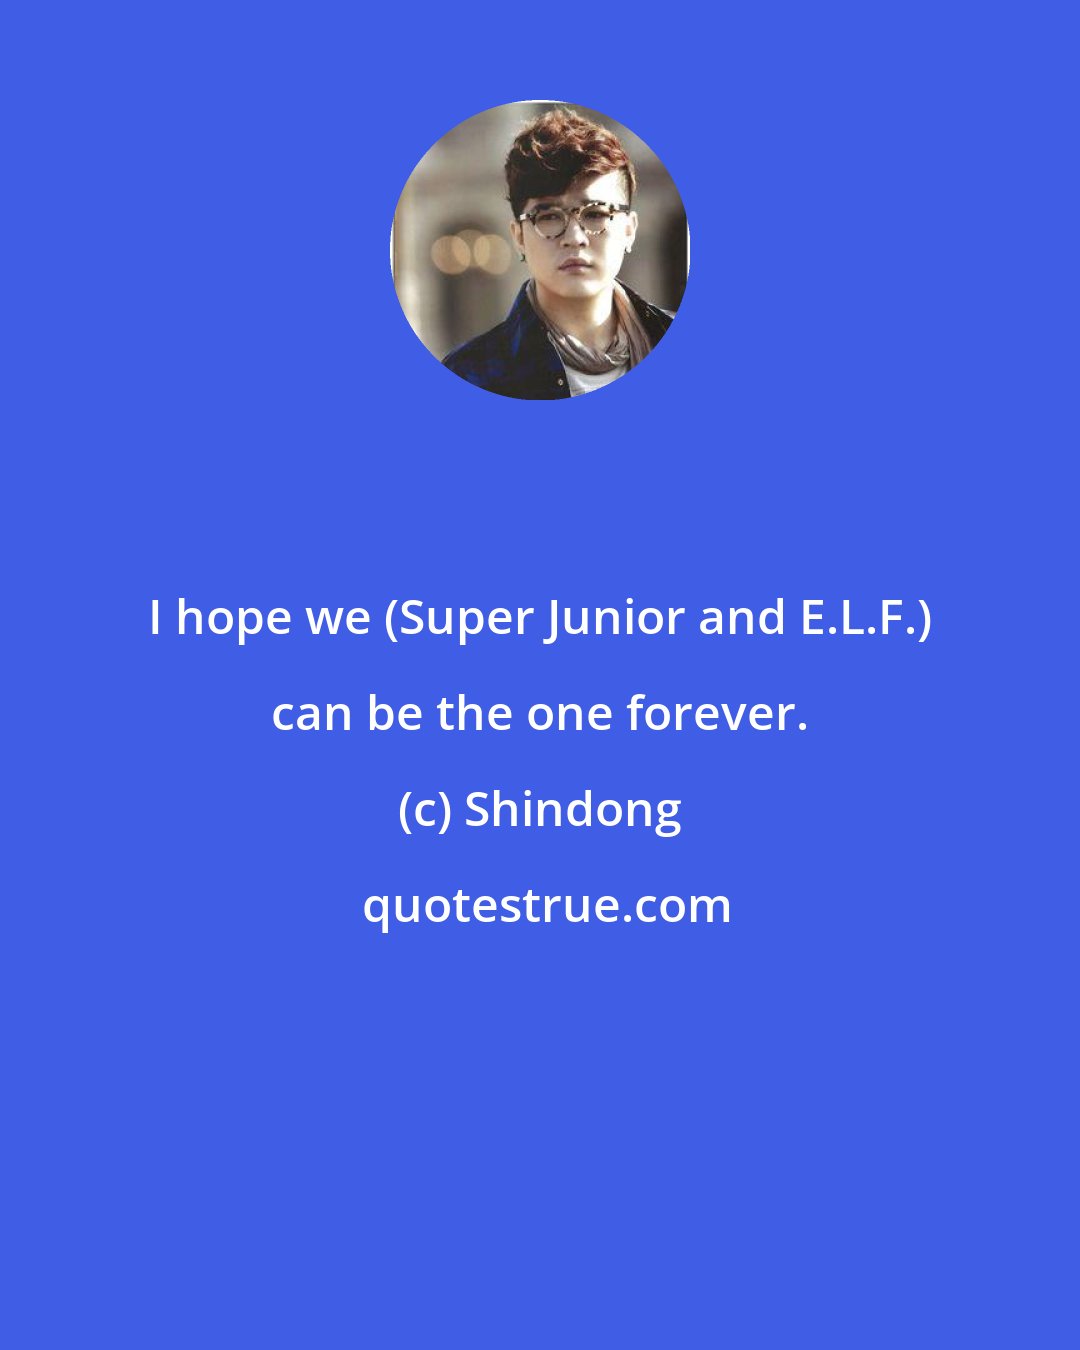 Shindong: I hope we (Super Junior and E.L.F.) can be the one forever.